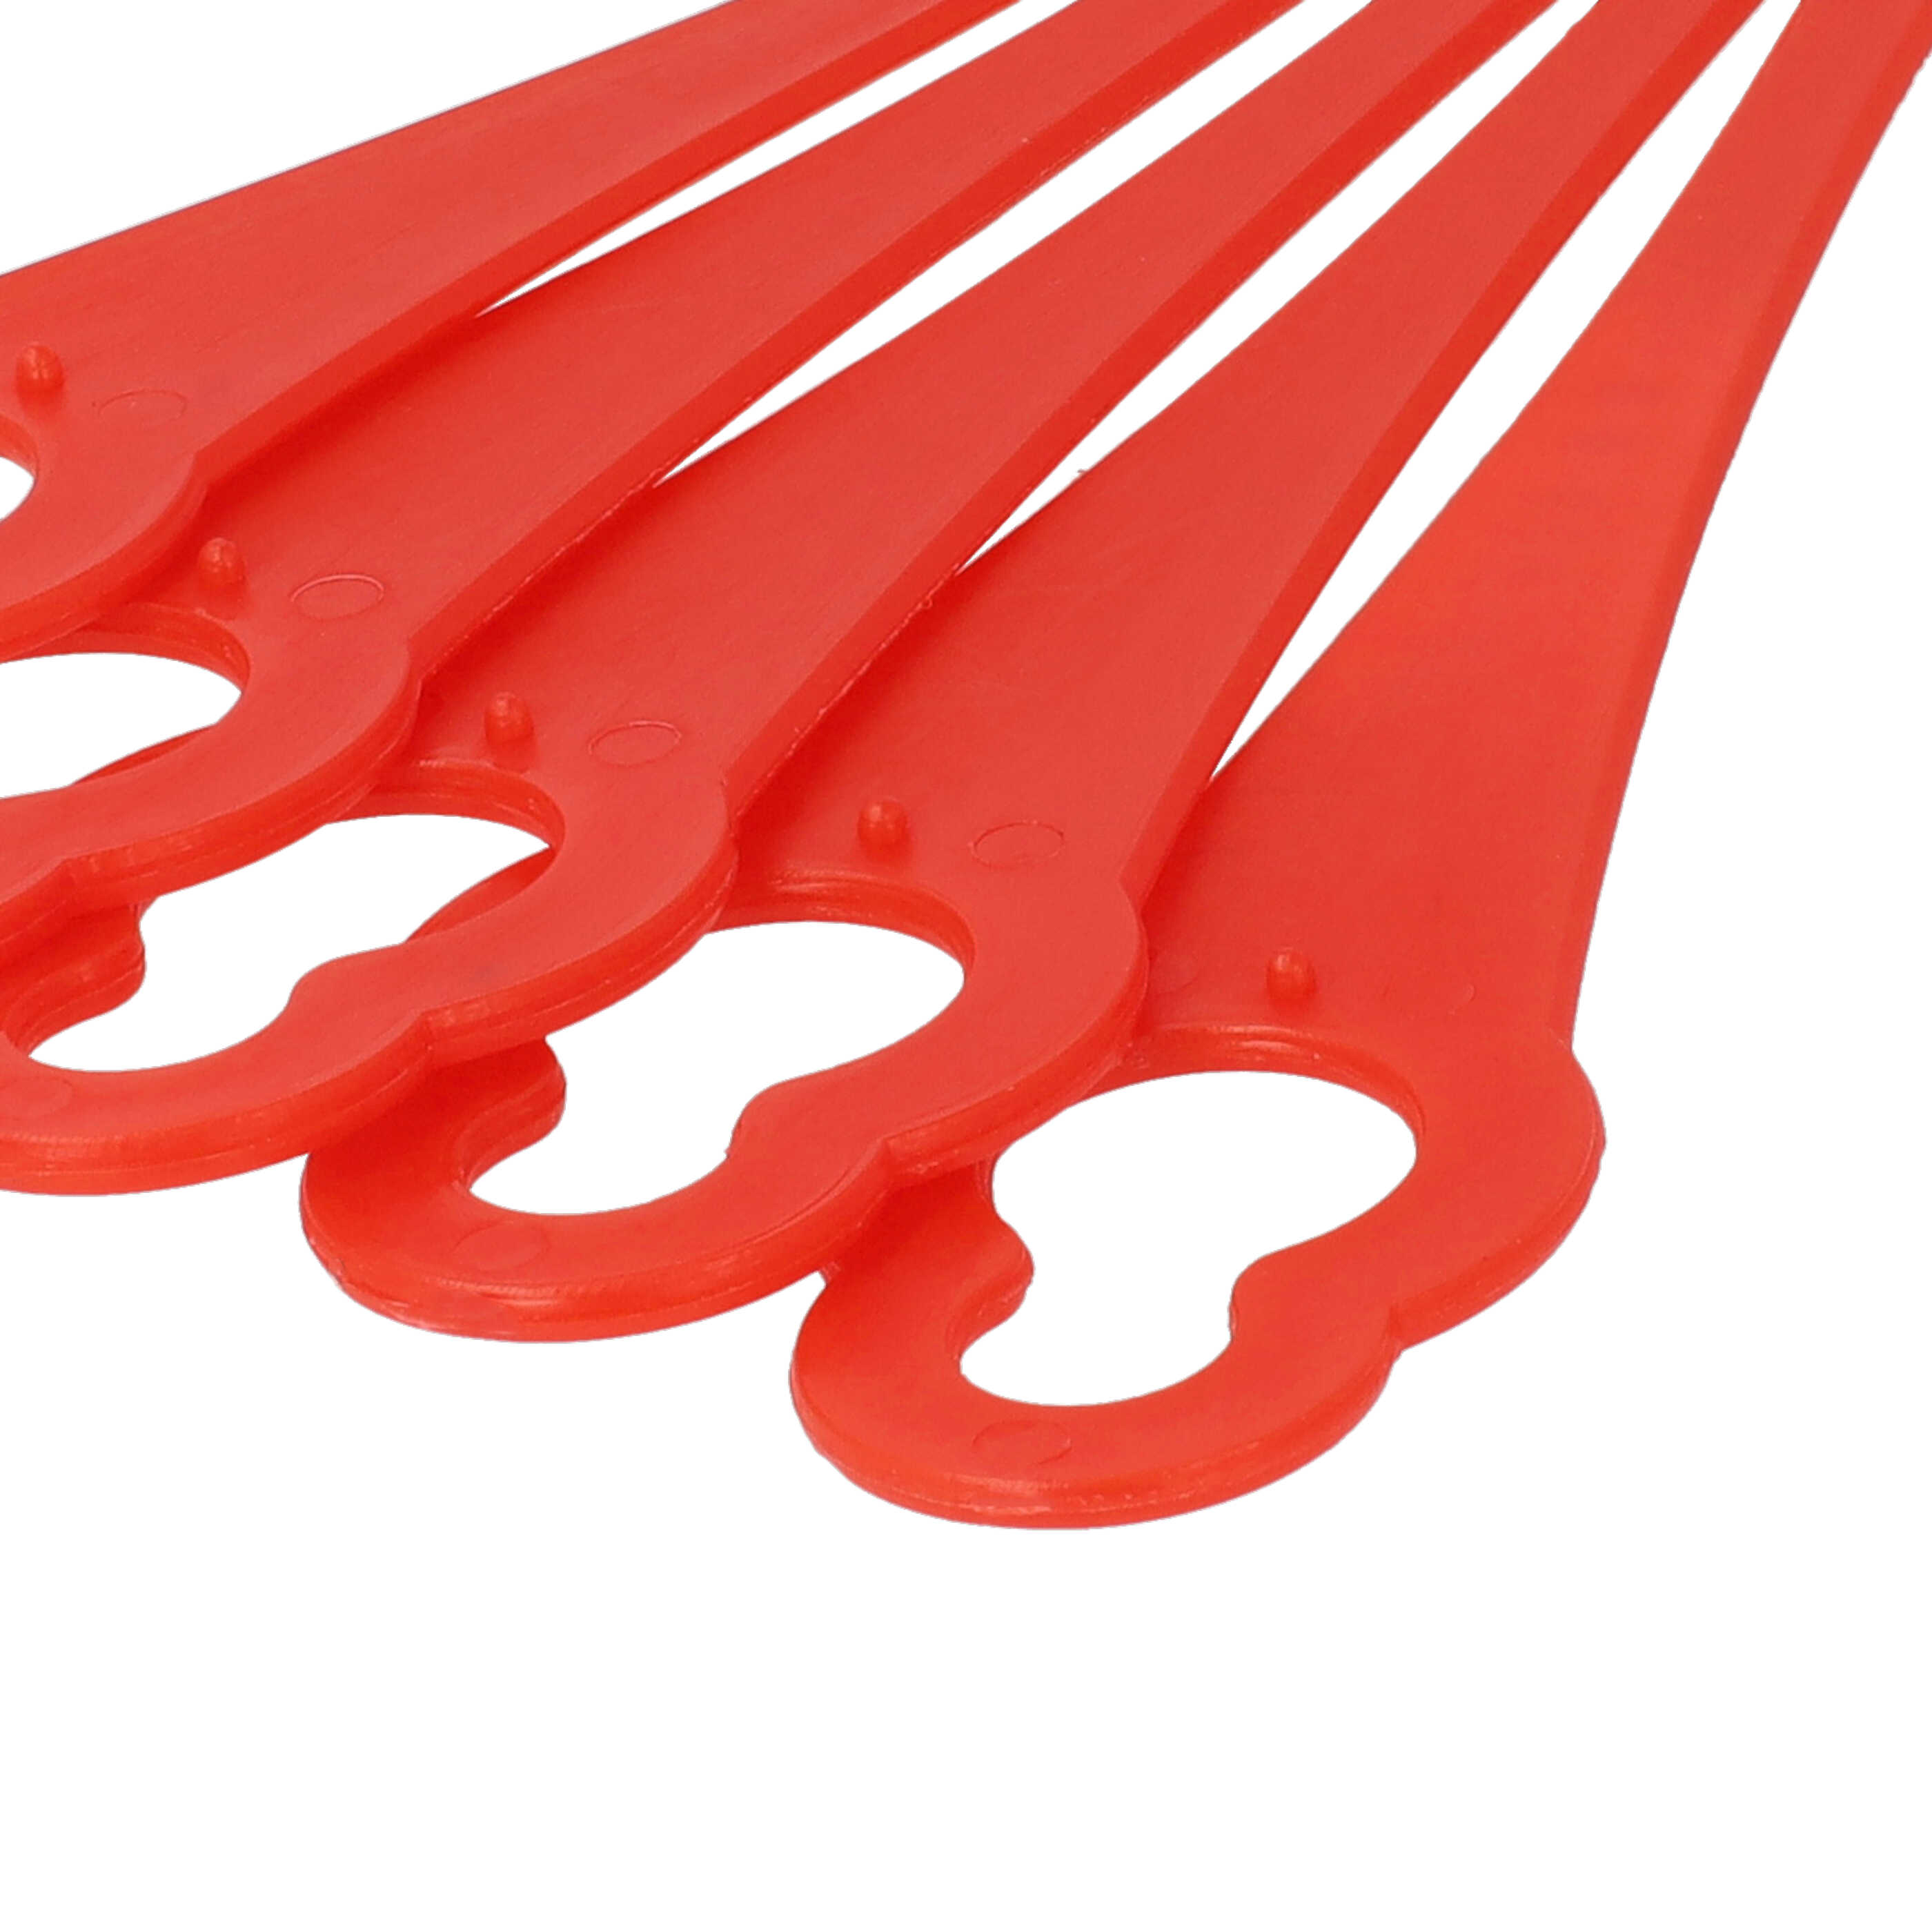 50x Exchange Blade replaces ALM BQ026 for Cordless Strimmer etc. - nylon / plastic, red